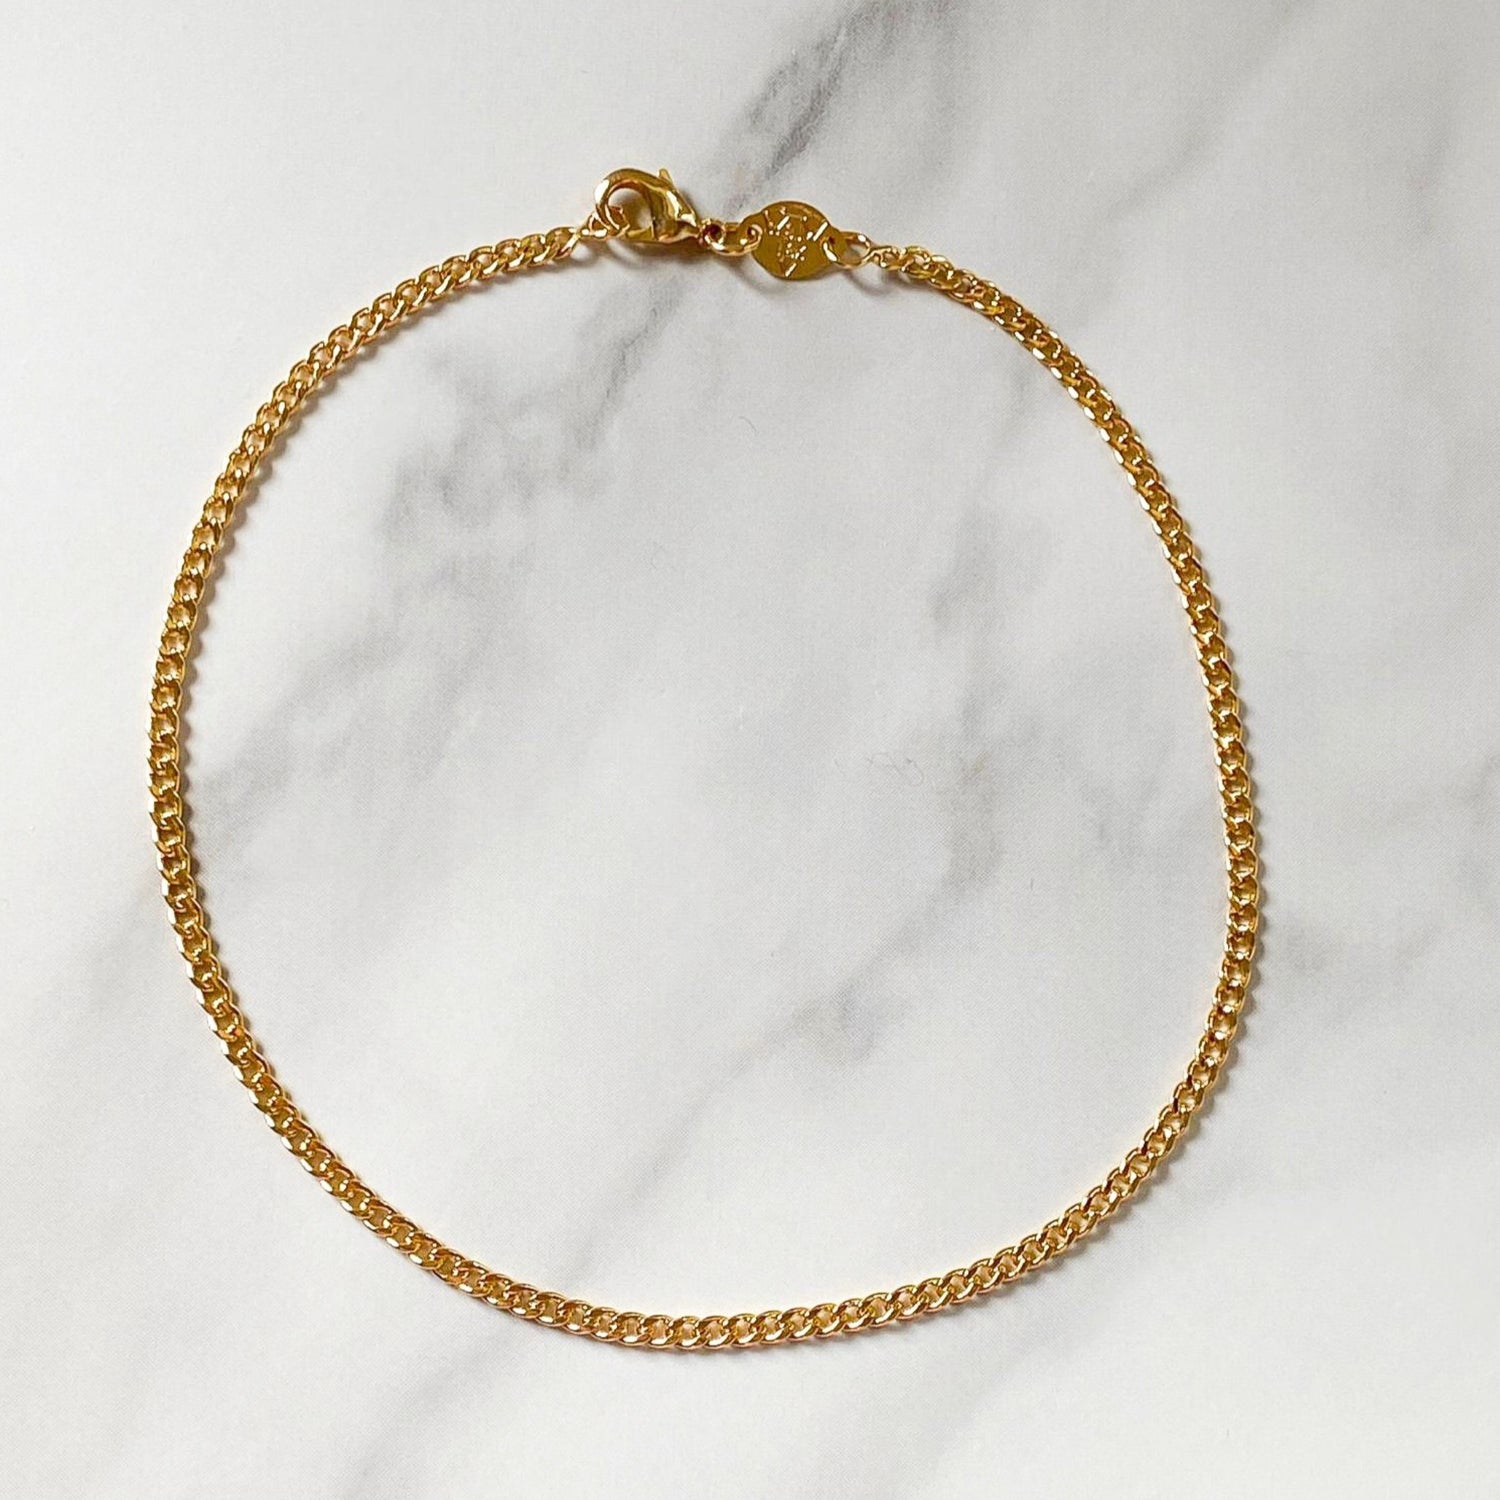 Lili Thin Cuban Link Gold-filled anklet 11" by ISVI Boutique